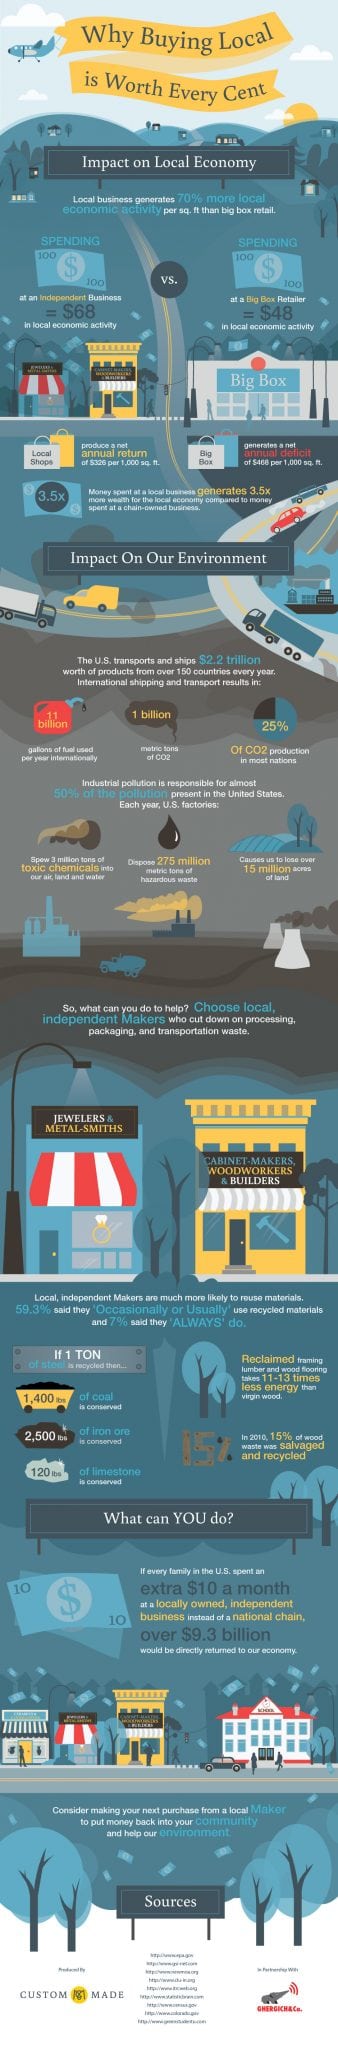 2013-11-20-buying_local_infograph1